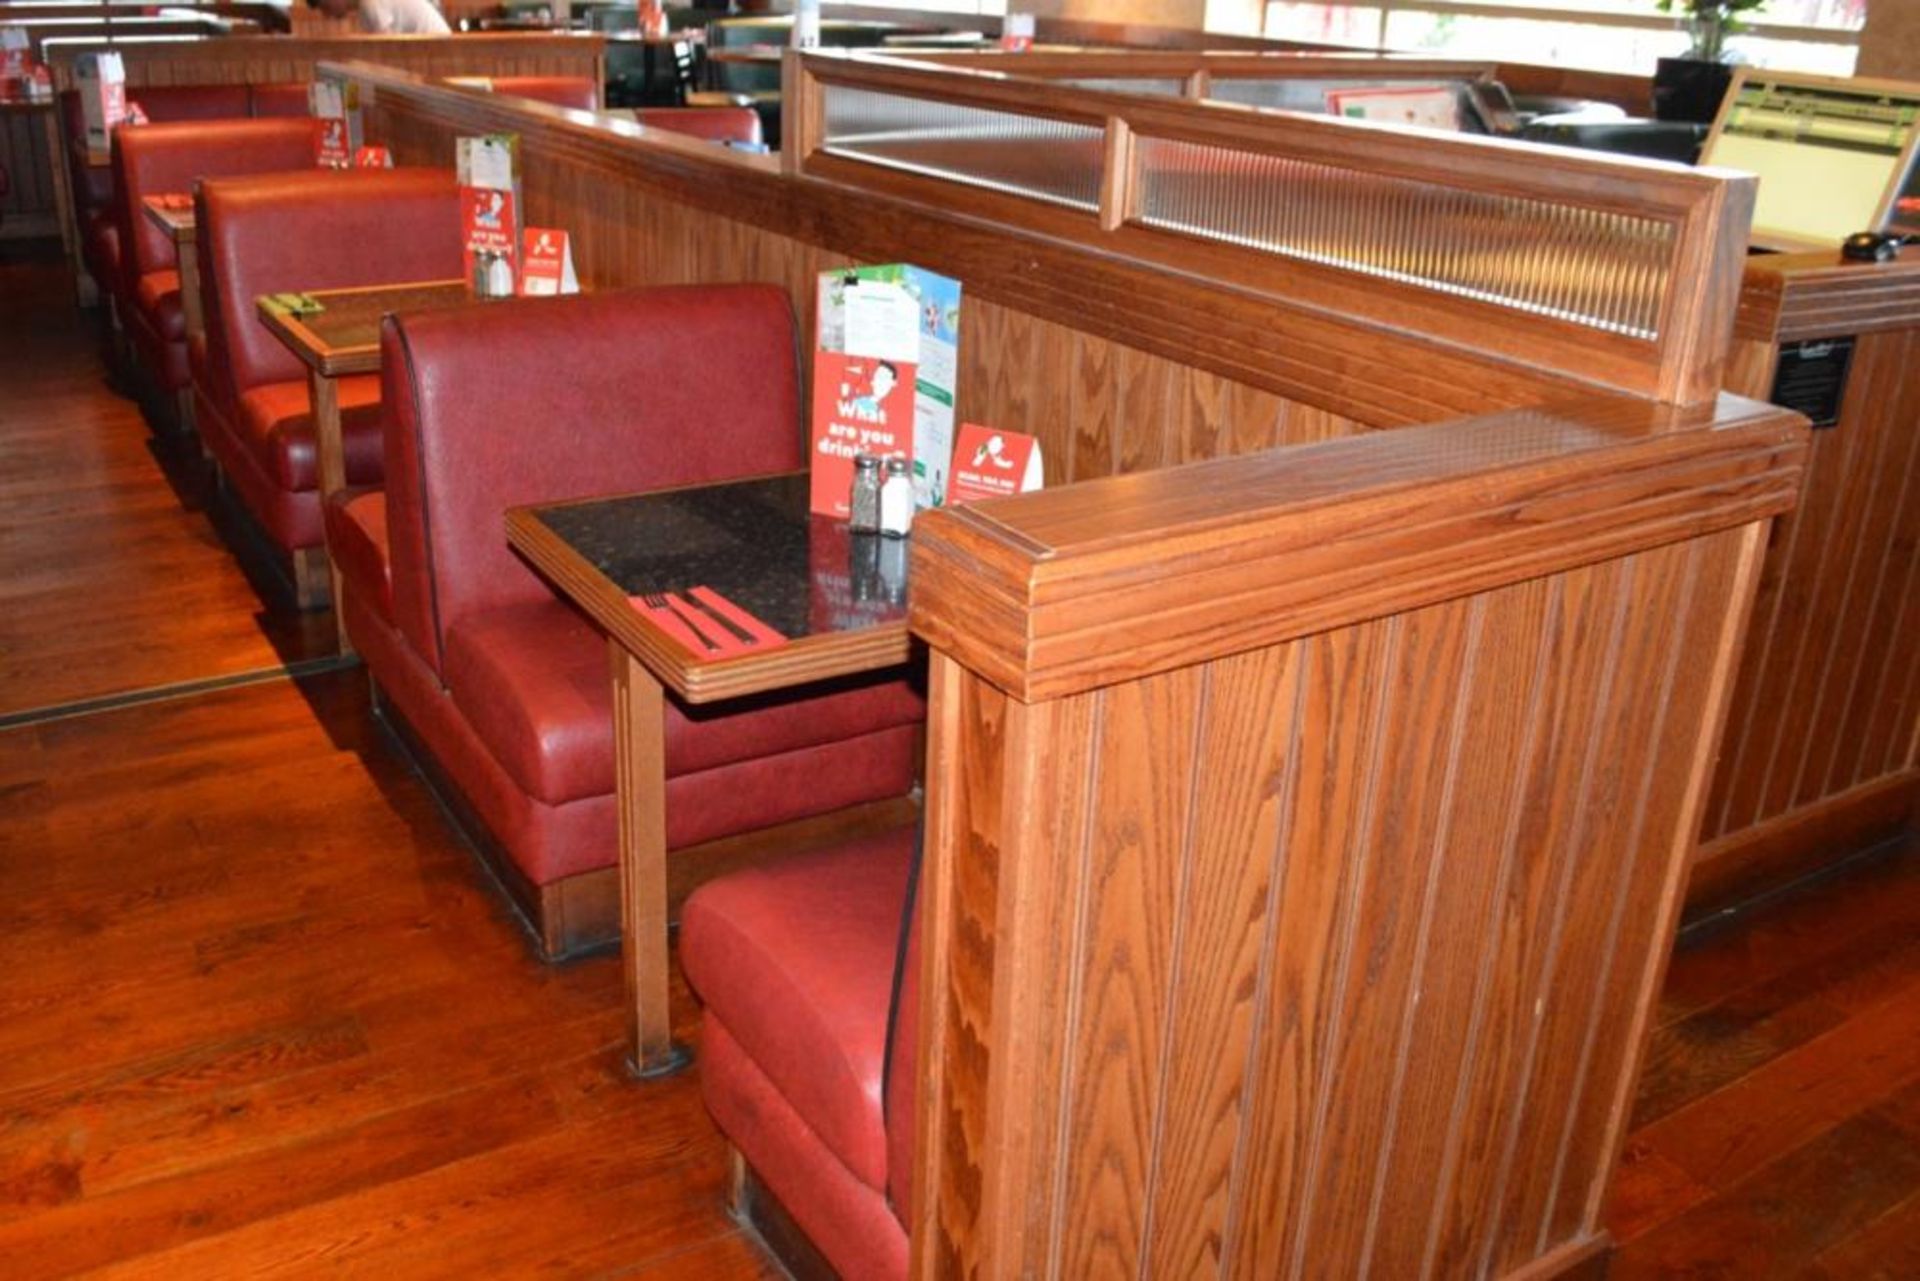 1 x Selection of Cosy Bespoke Seating Booths in a 1950's Retro American Diner Design With Dining Tab - Image 3 of 30